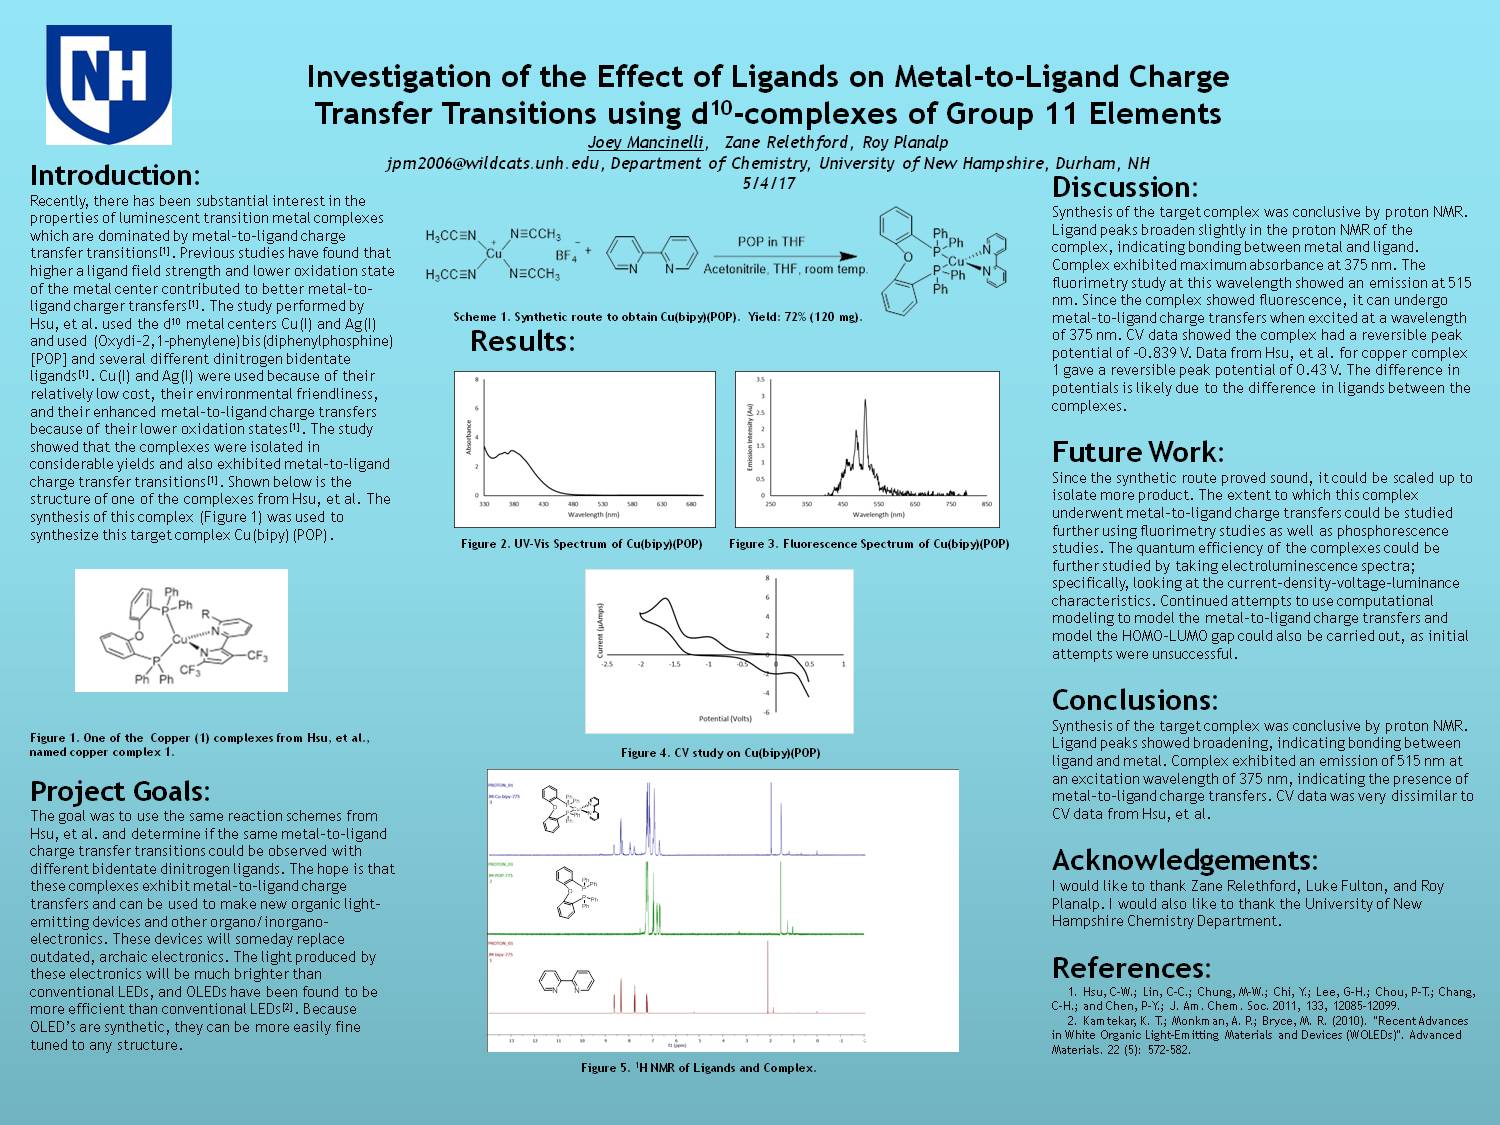 Investigation Of The Effect Of Ligands On Metal-To-Ligand Charge Transfer Transitions Using D10-Complexes Of Group 11 Elements by jpm2006